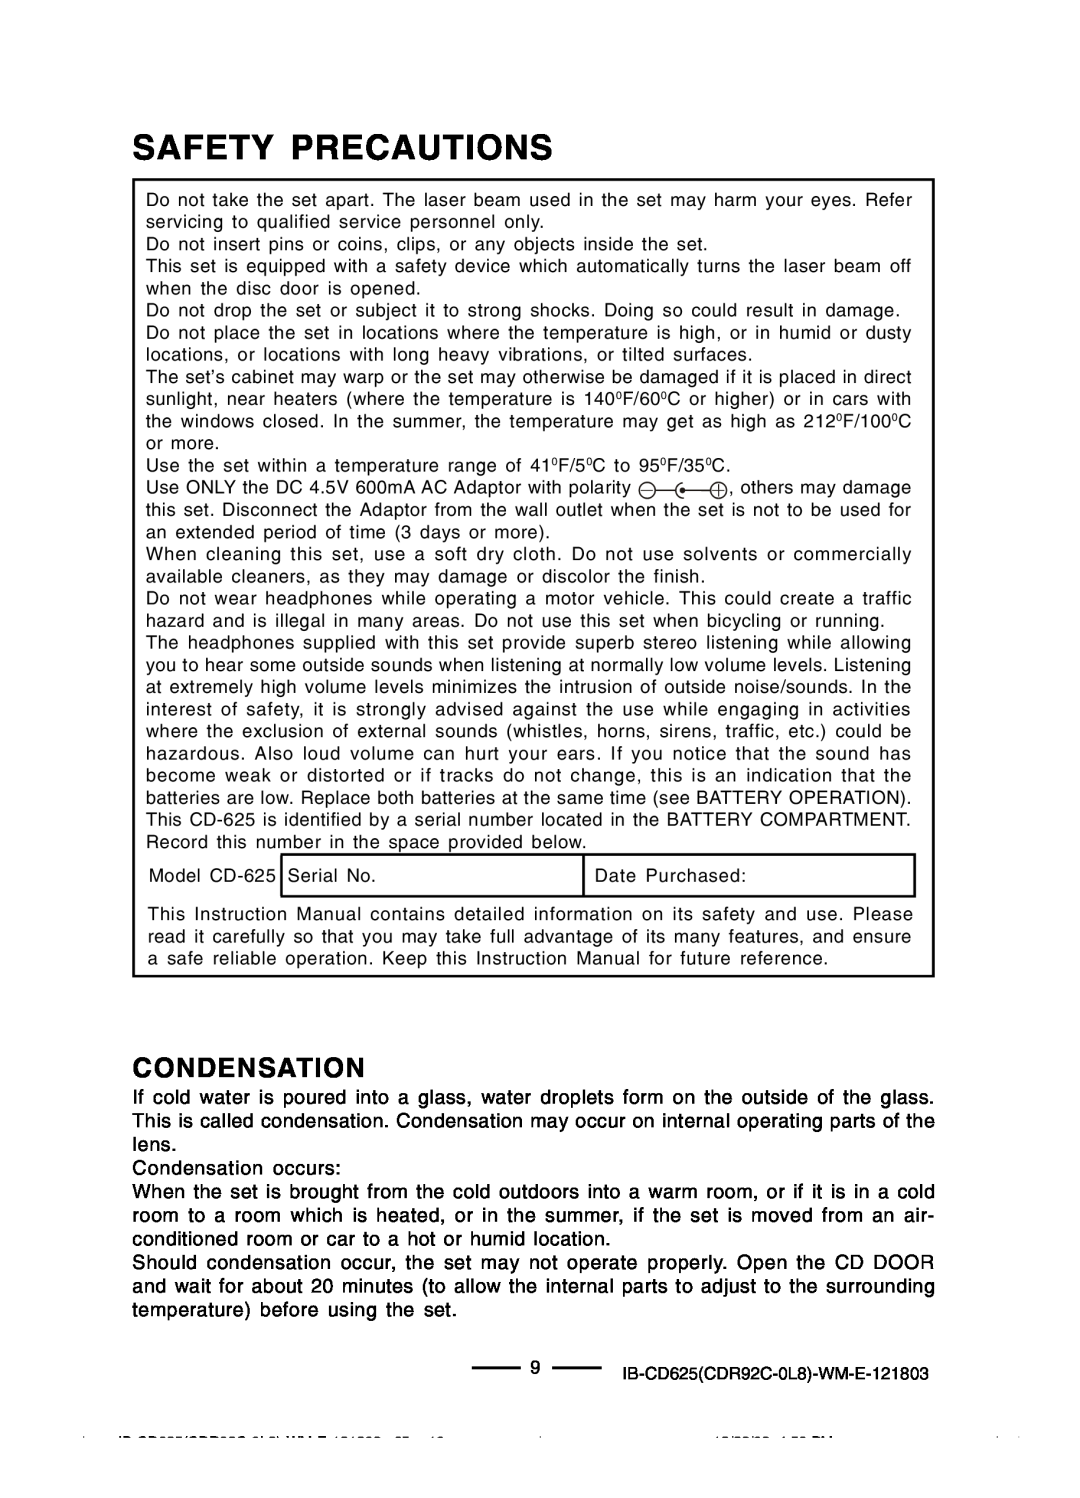 Lenoxx Electronics CD625 operating instructions Safety Precautions, Condensation 